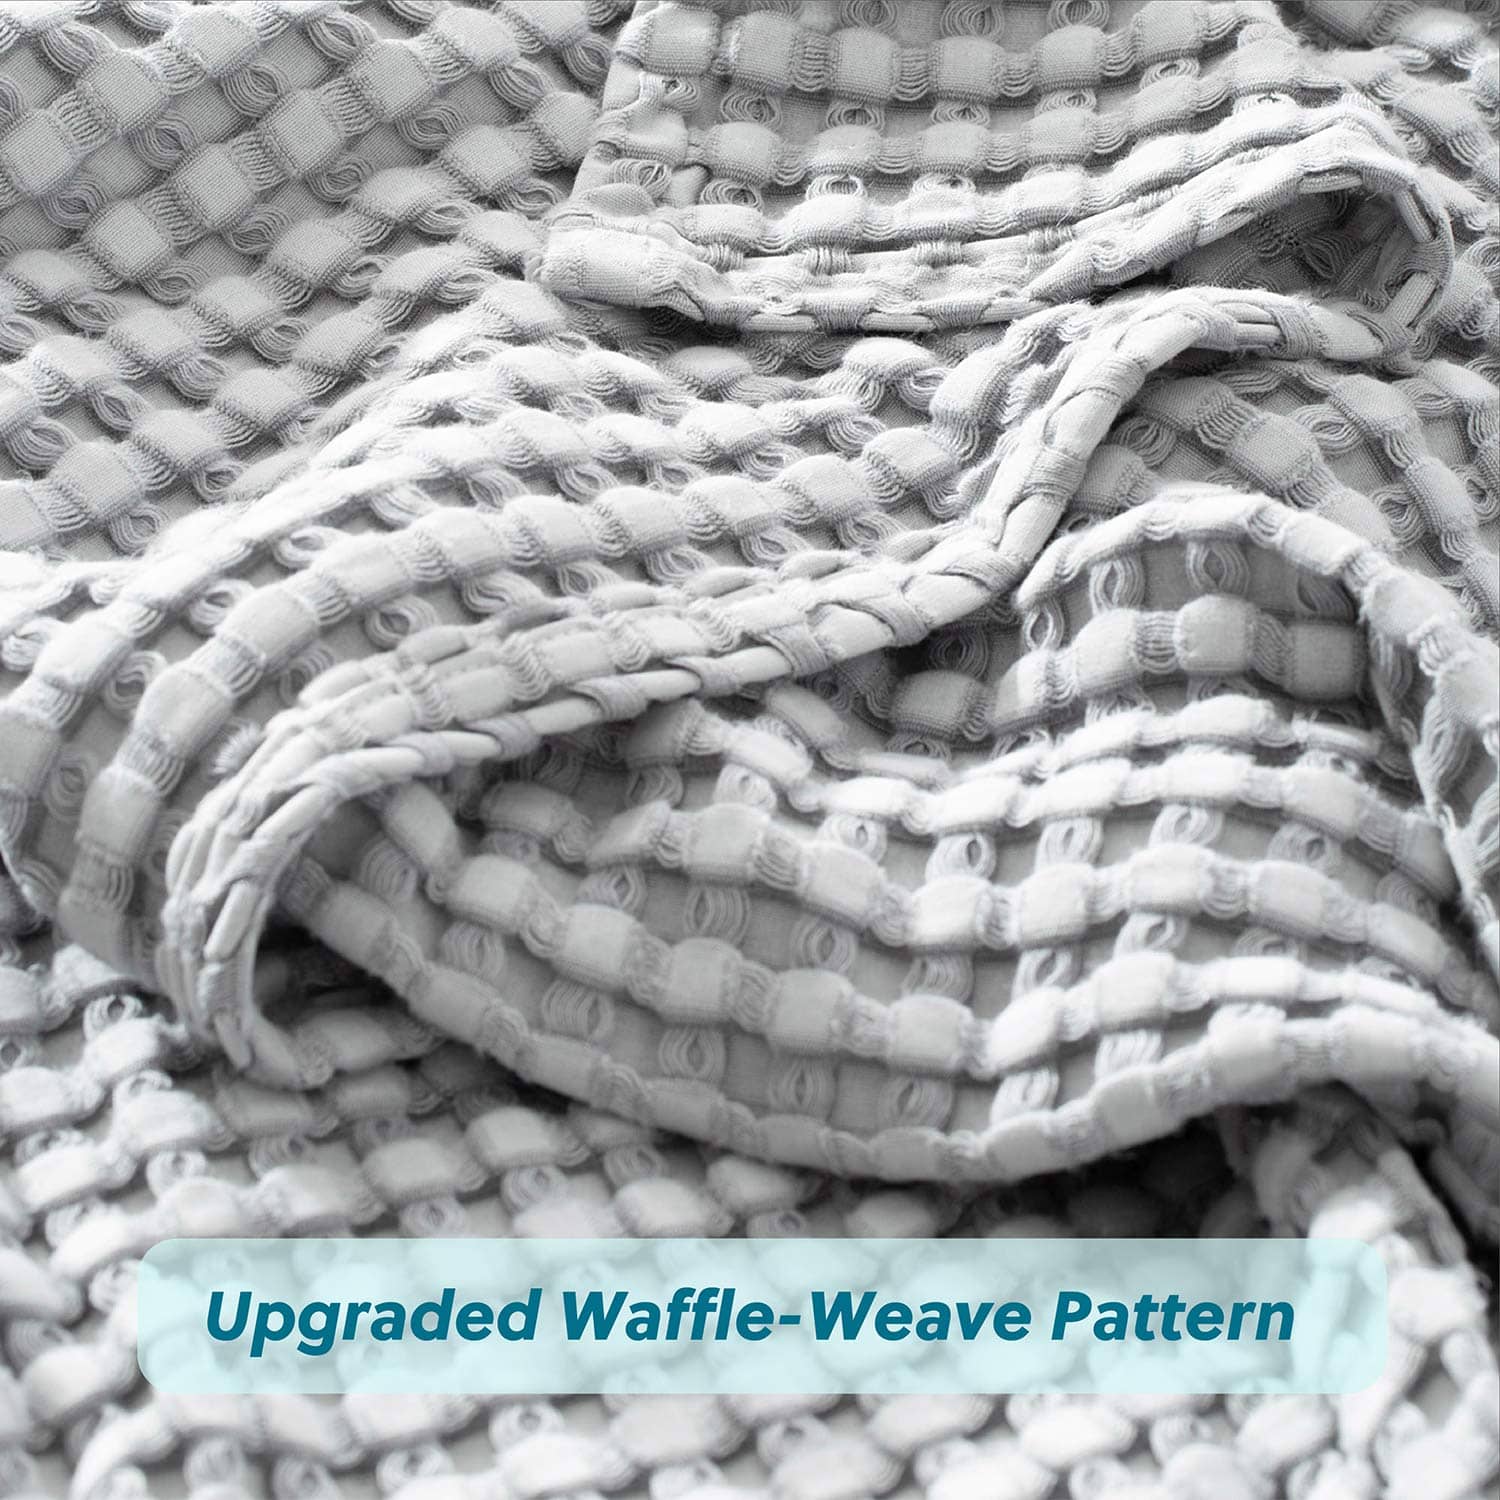 Viscose from Bamboo Waffle Weave Blanket